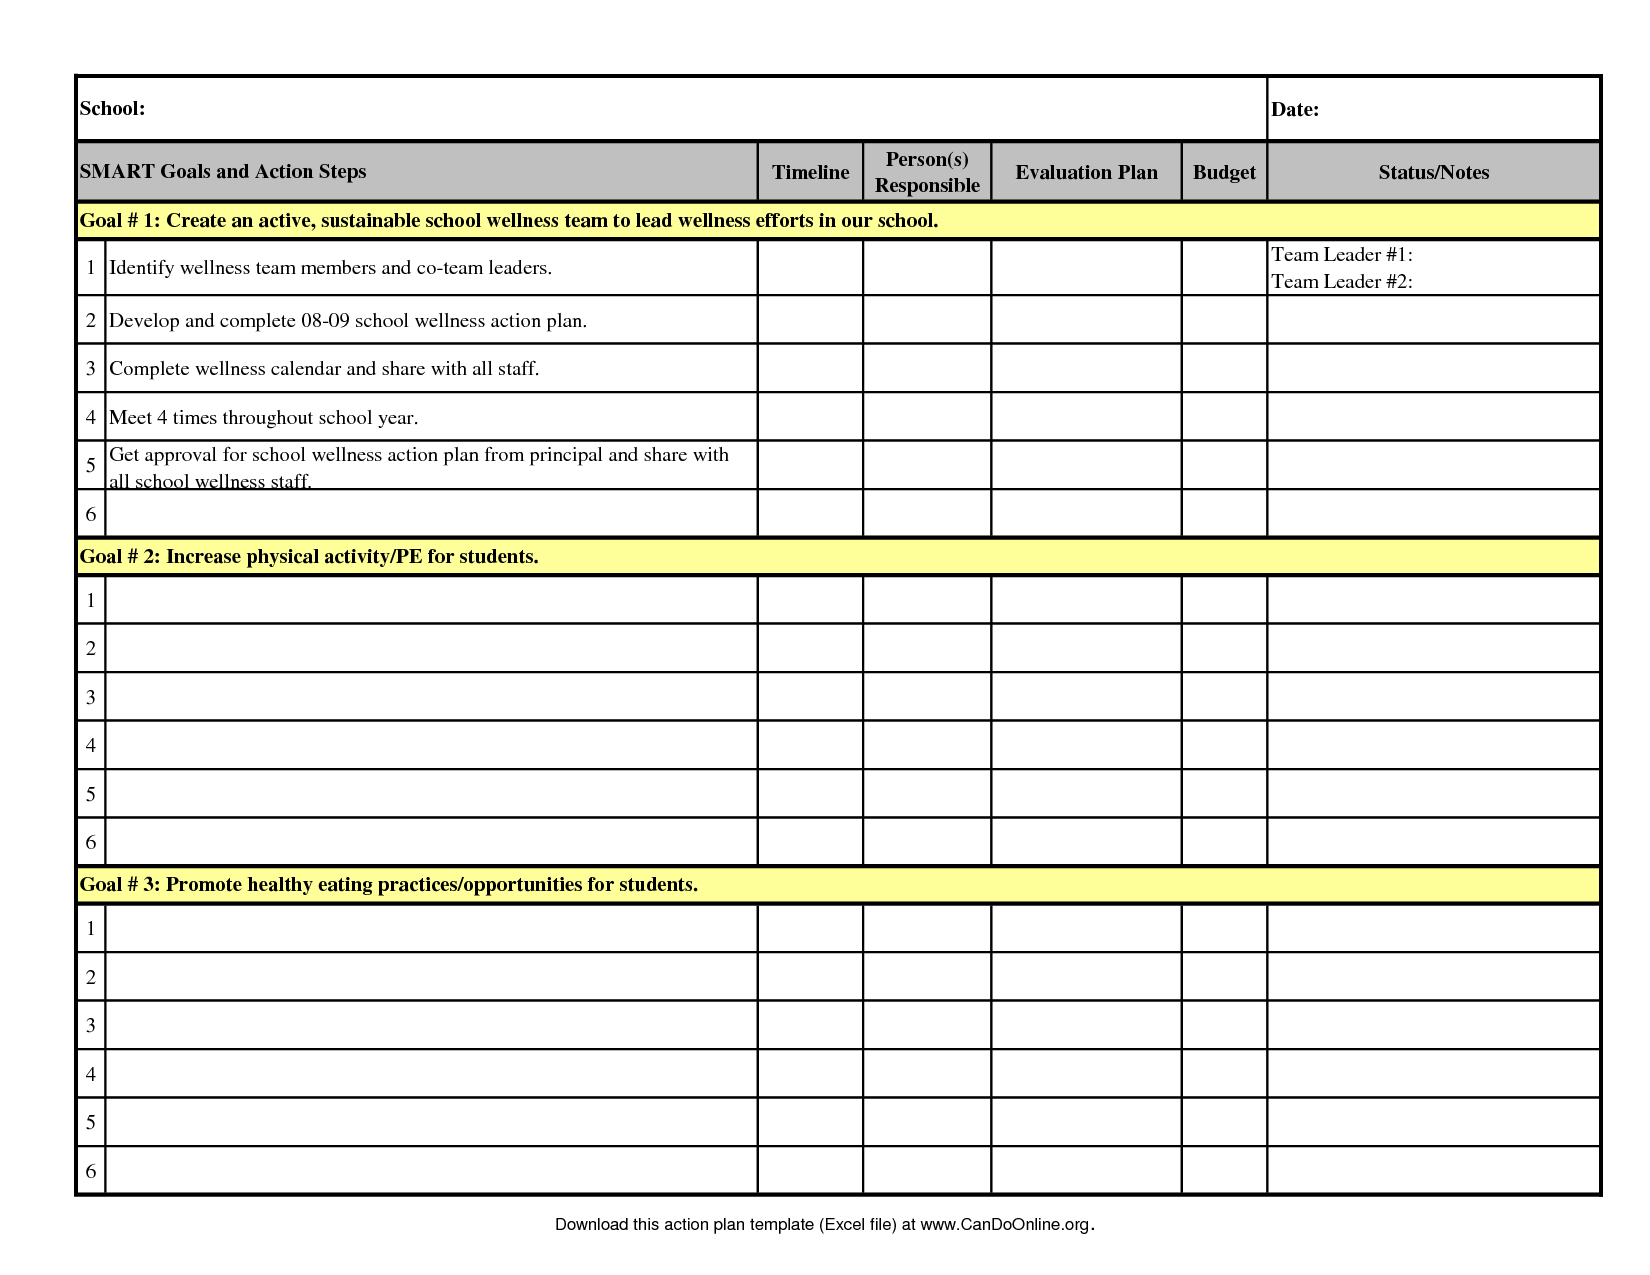 Business Action Plan Template Excel  Google Search | Event pertaining to Event Planning Template Excel